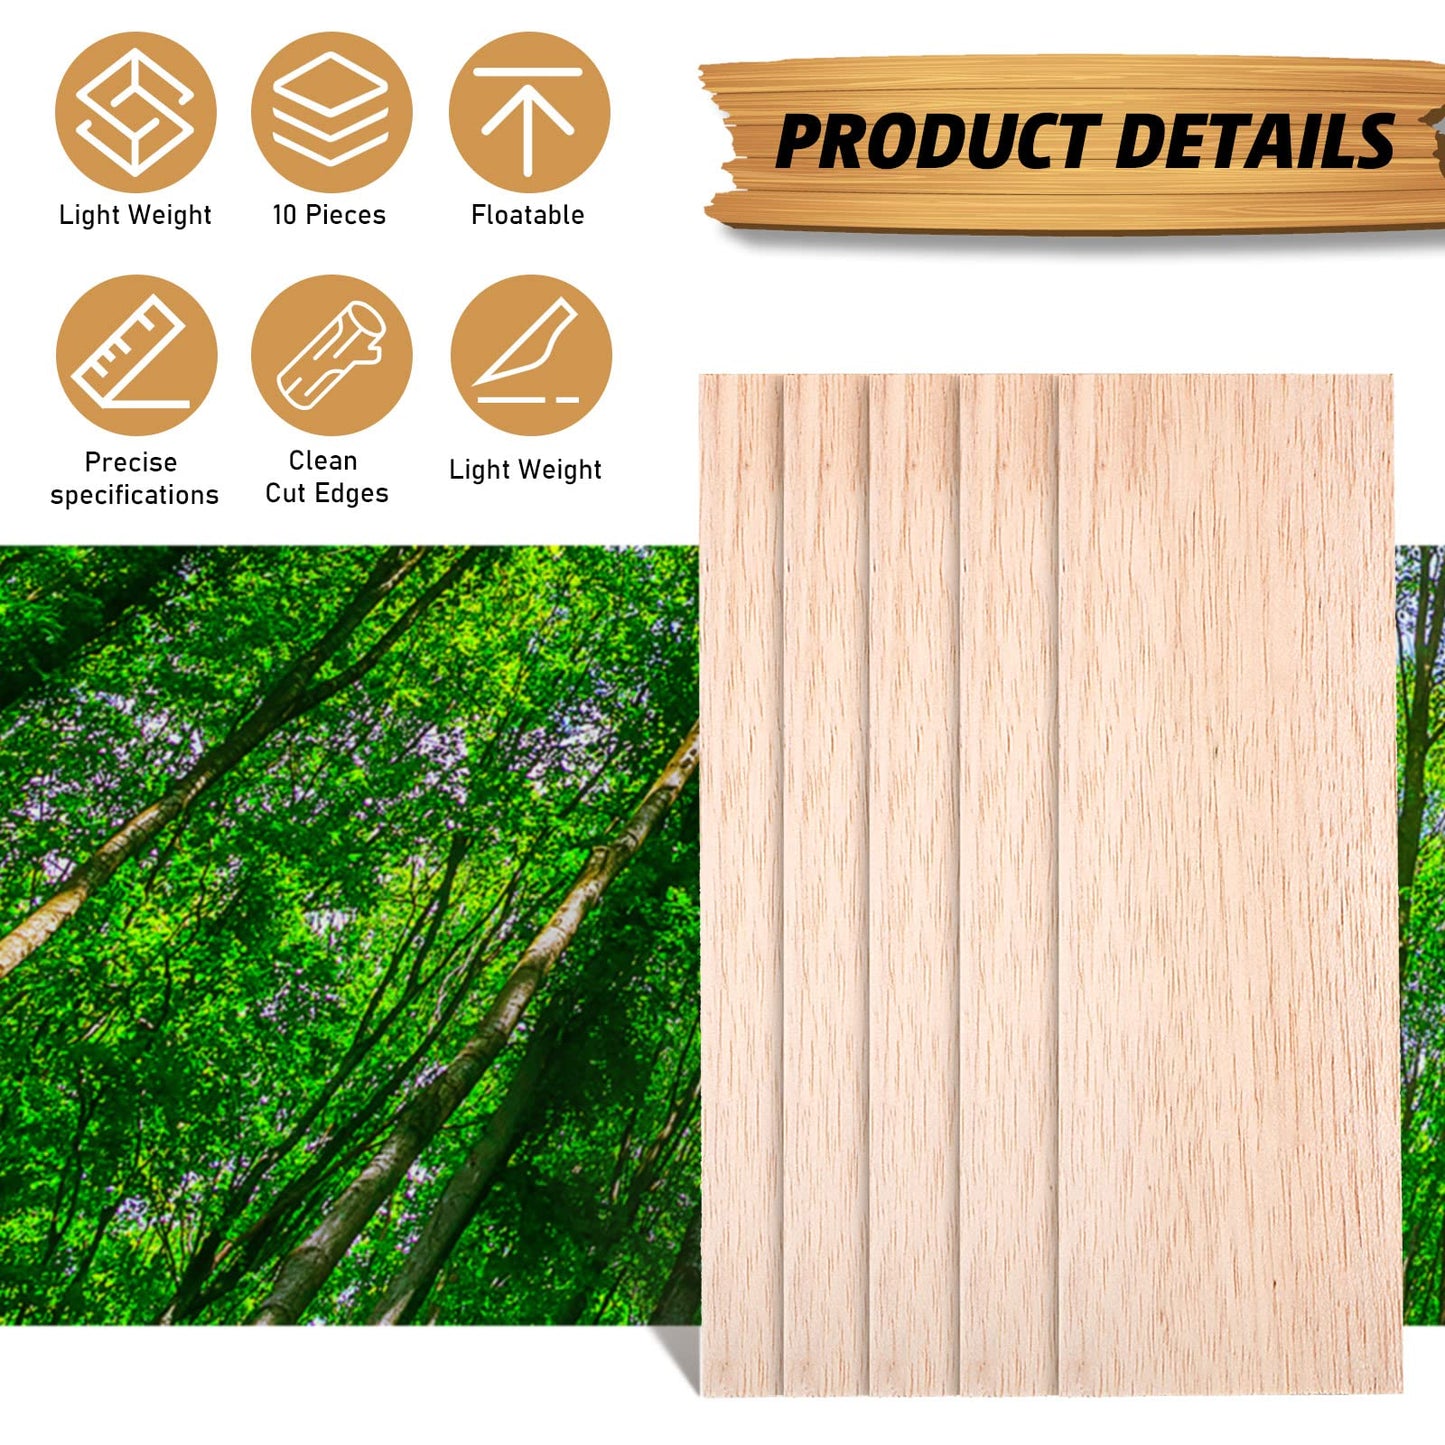 10 Pack Balsa Wood Sheets 1/8 Inches Thick 12 x 4 Inches Unfinished Wooden Board Wood Sheets for Crafts House Aircraft Ship Boat Arts School Projects